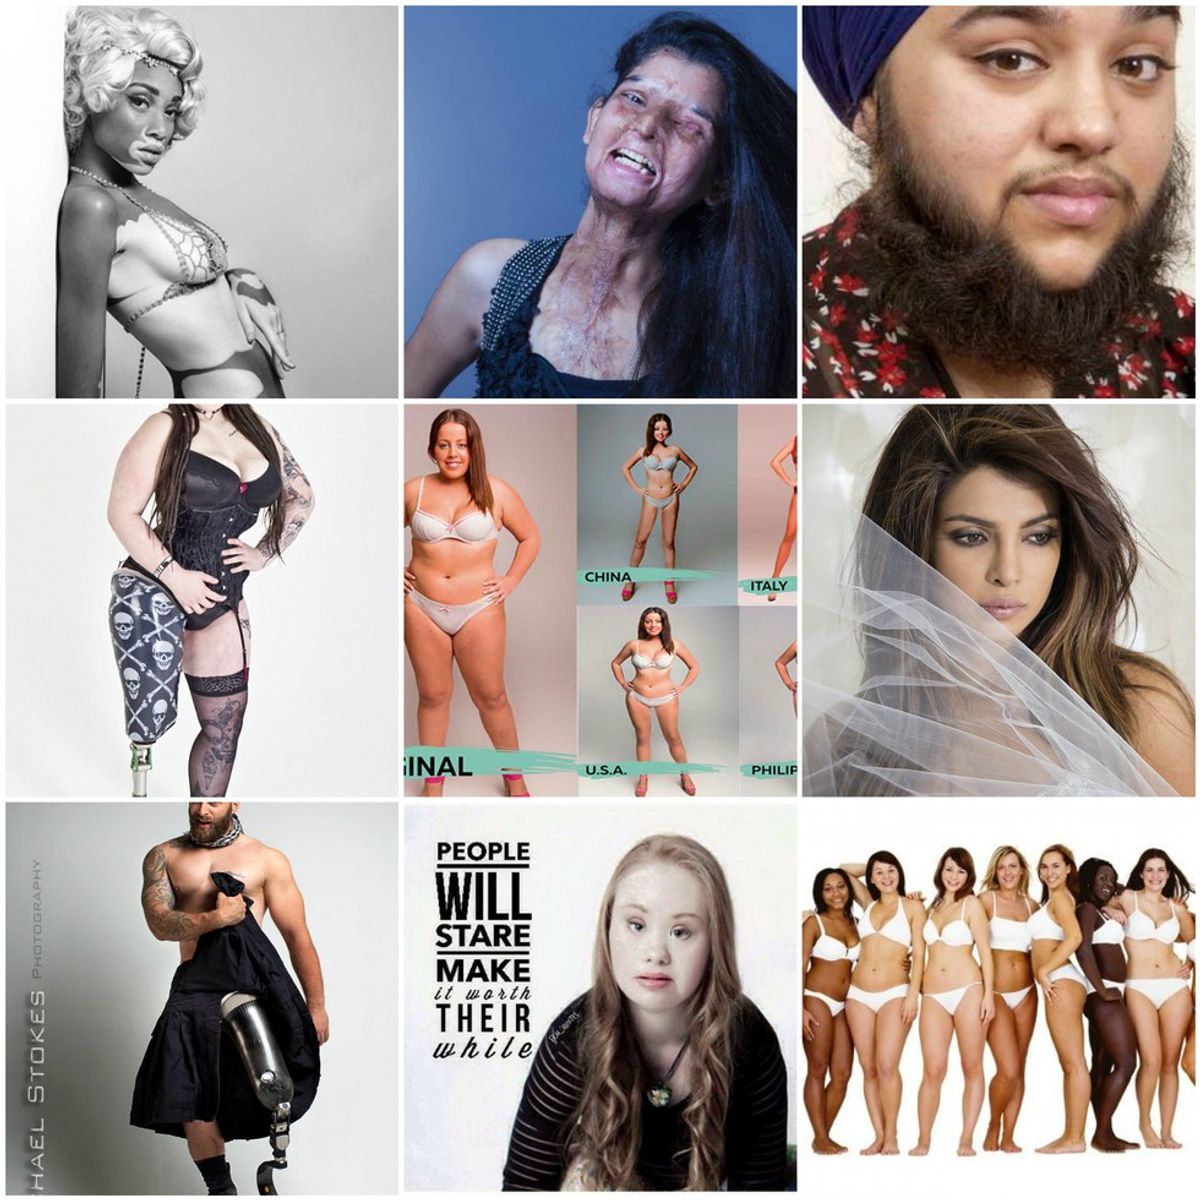 10 Individuals Who Are Redefining Western Standards Of Beauty For The Better